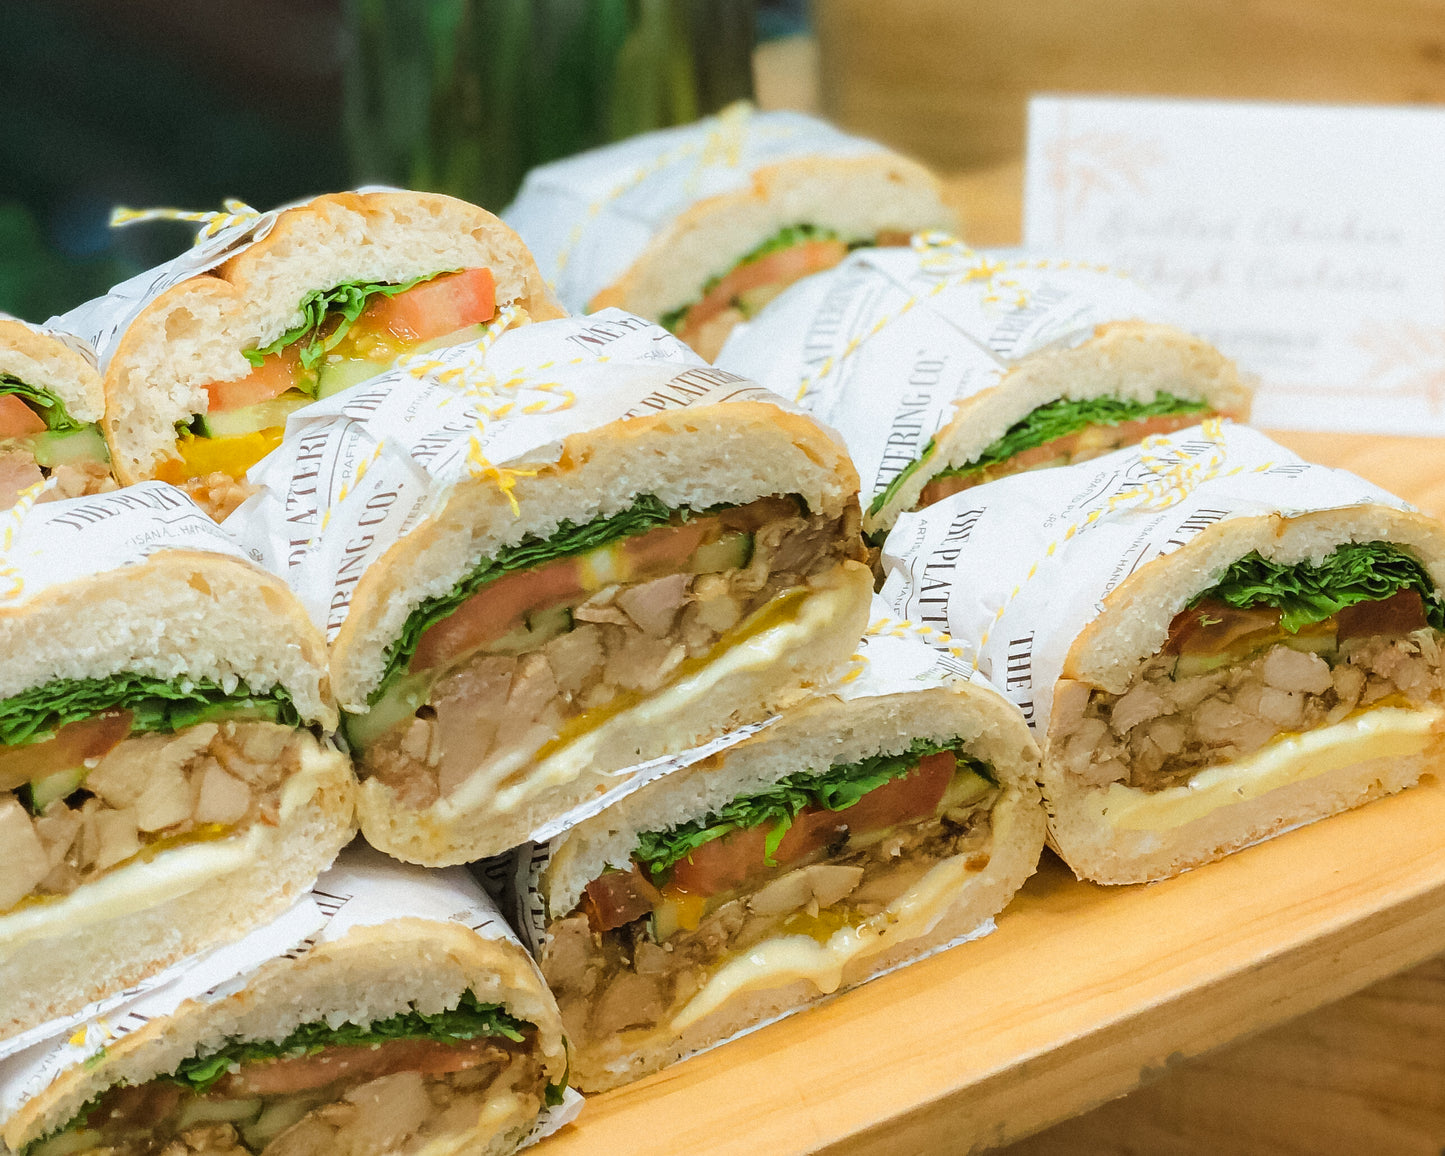 Signature Lunch & Dinner Rustic Sandwich Catering (from $560 for 20pax)